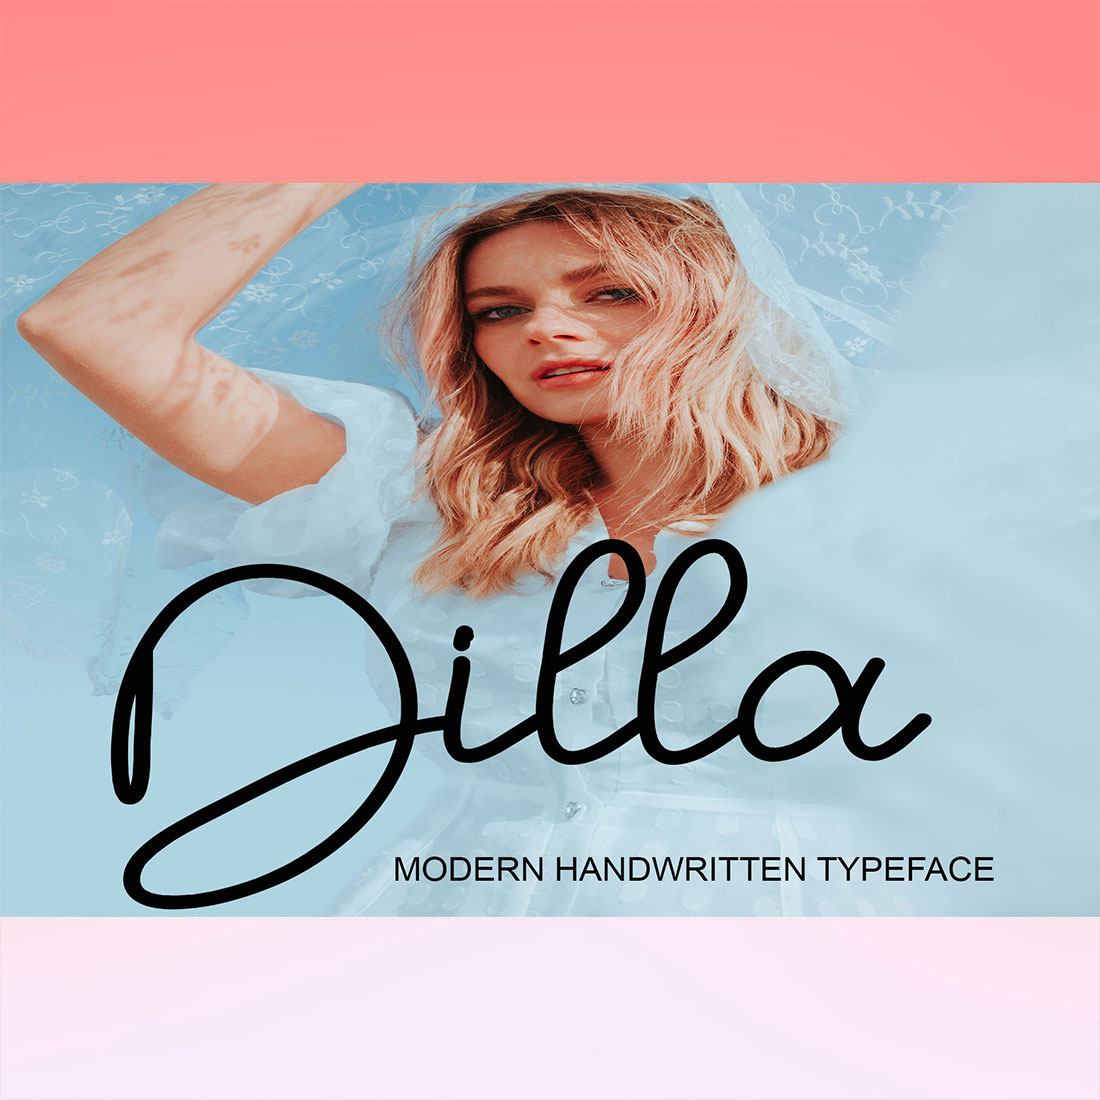 Woman with blonde hair and a white shirt with the words dillla on it.